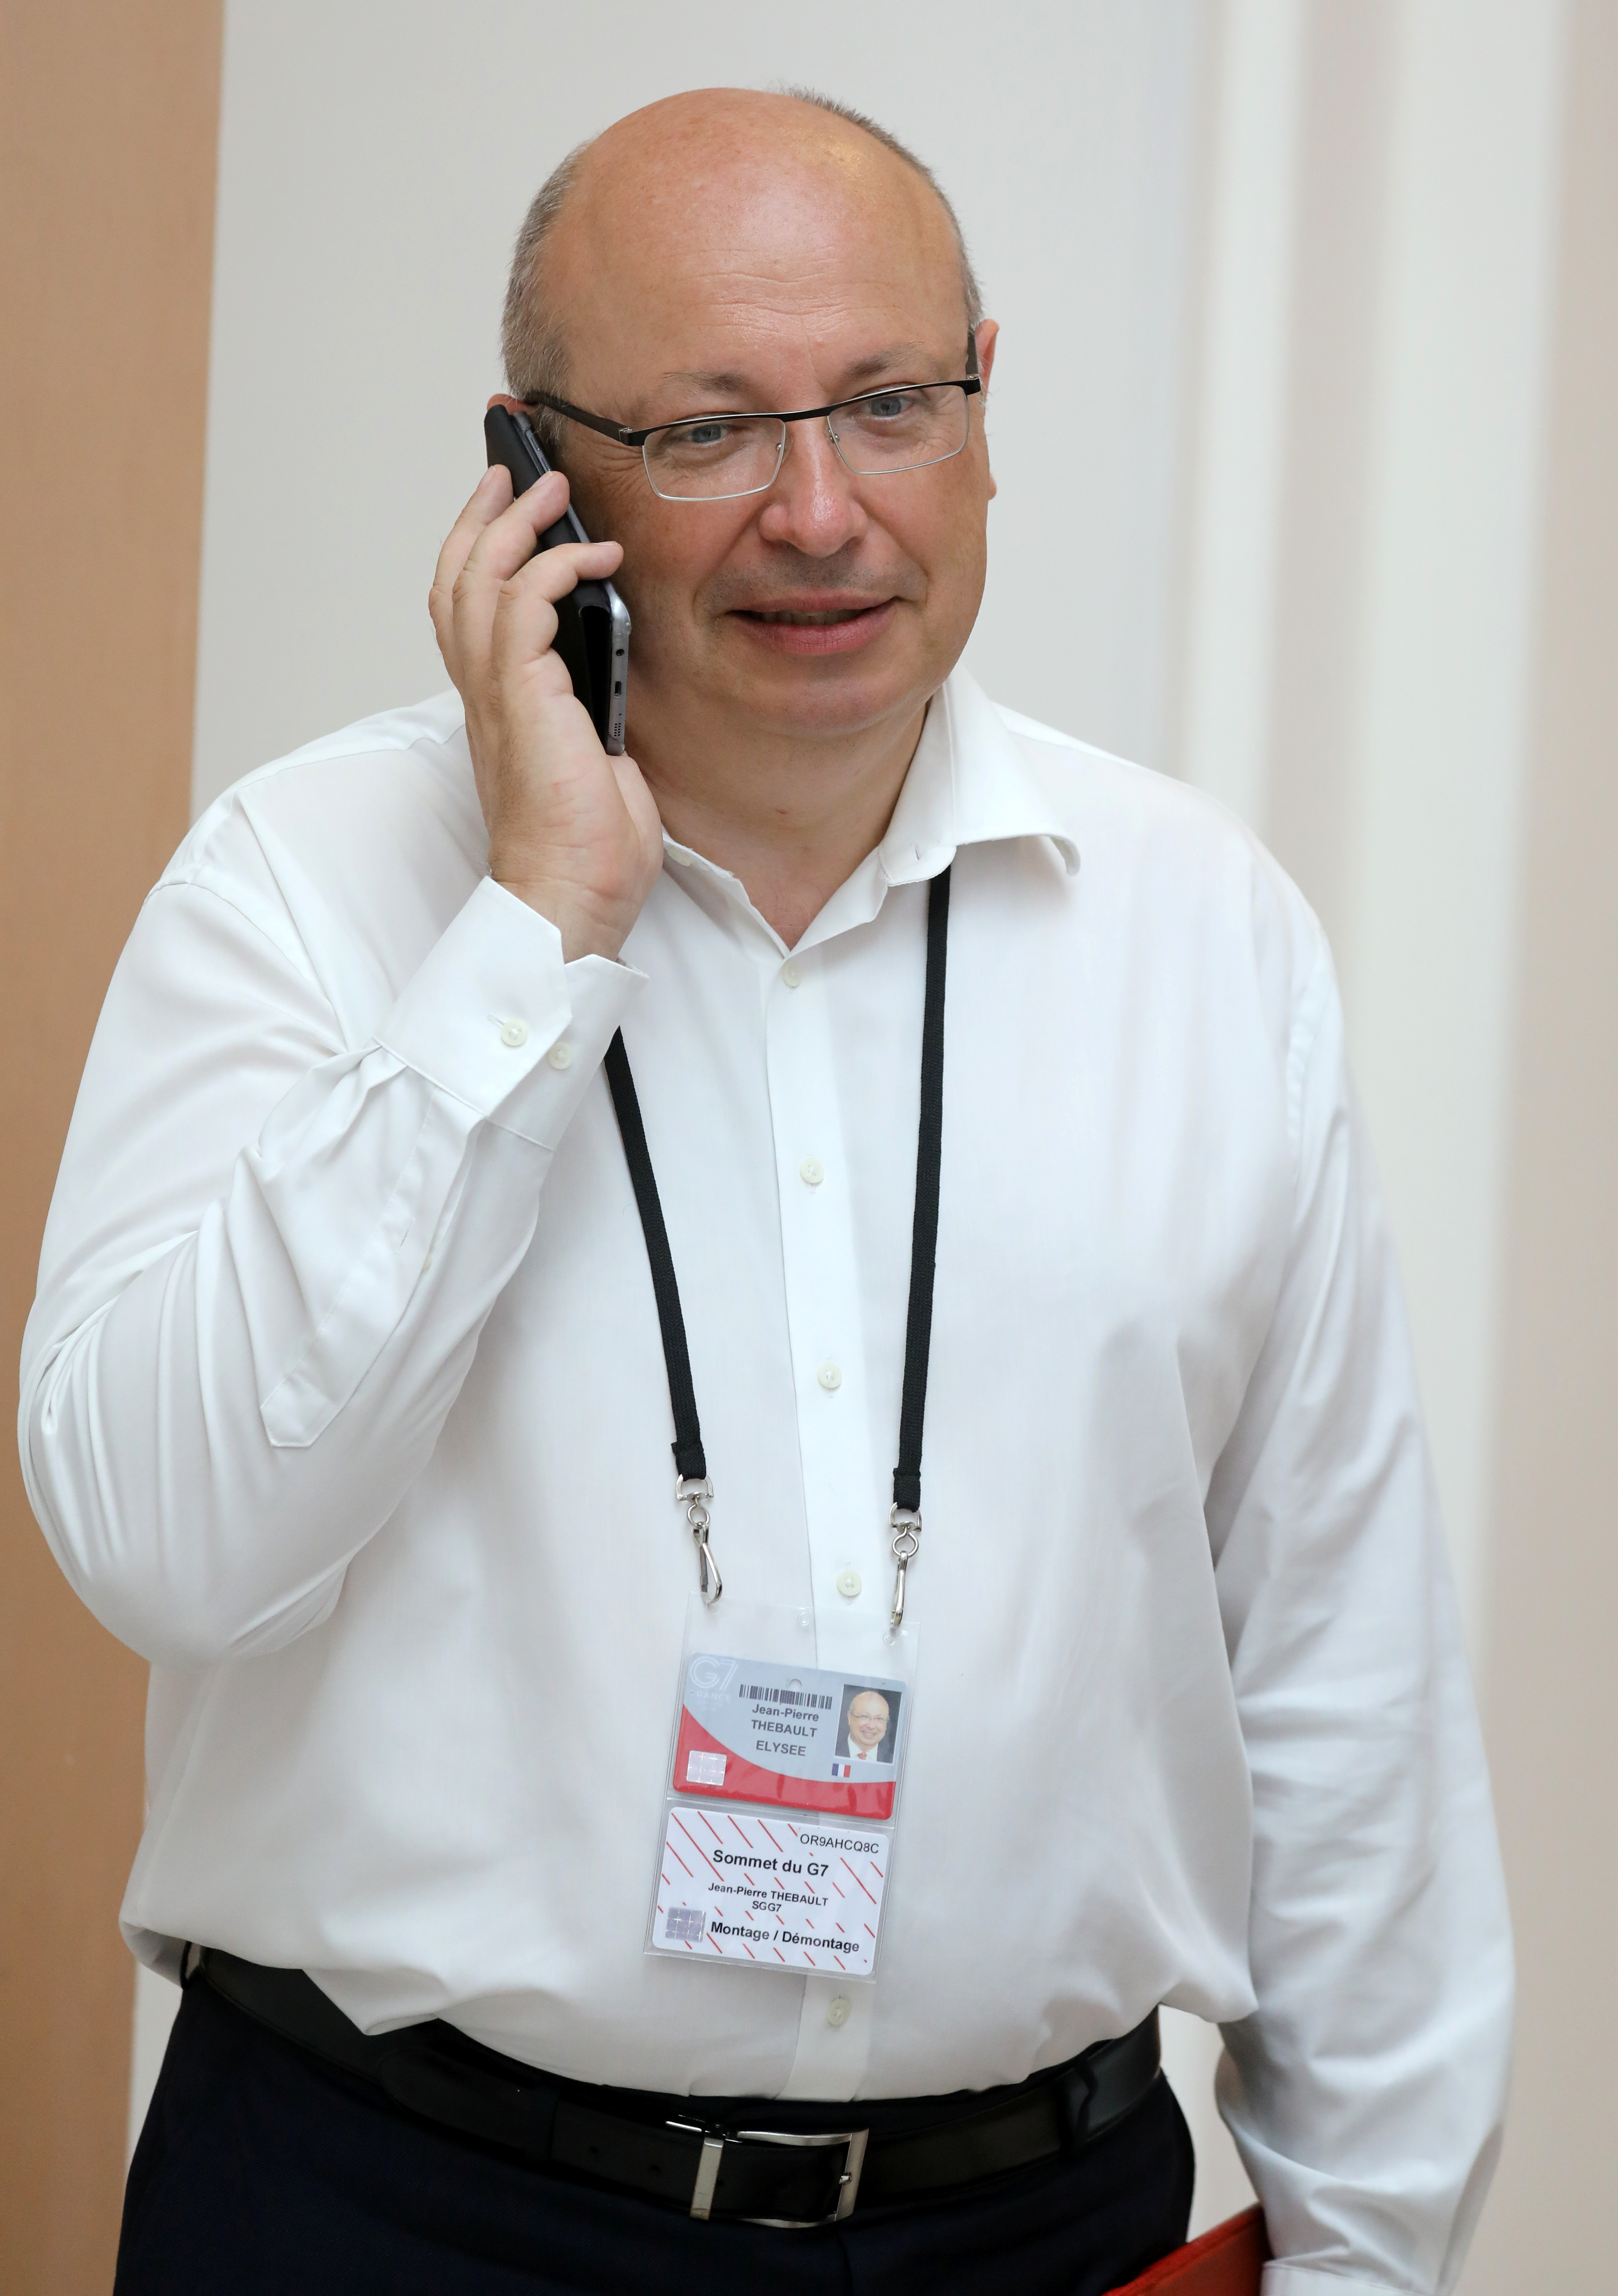 French Ambassador in charge of the G7 summit preparations Jean-Pierre Thebault speaks on his mobile phone while working in Biarritz, France August 25, 2019. Ludovic Marin/Pool via REUTERS/Files